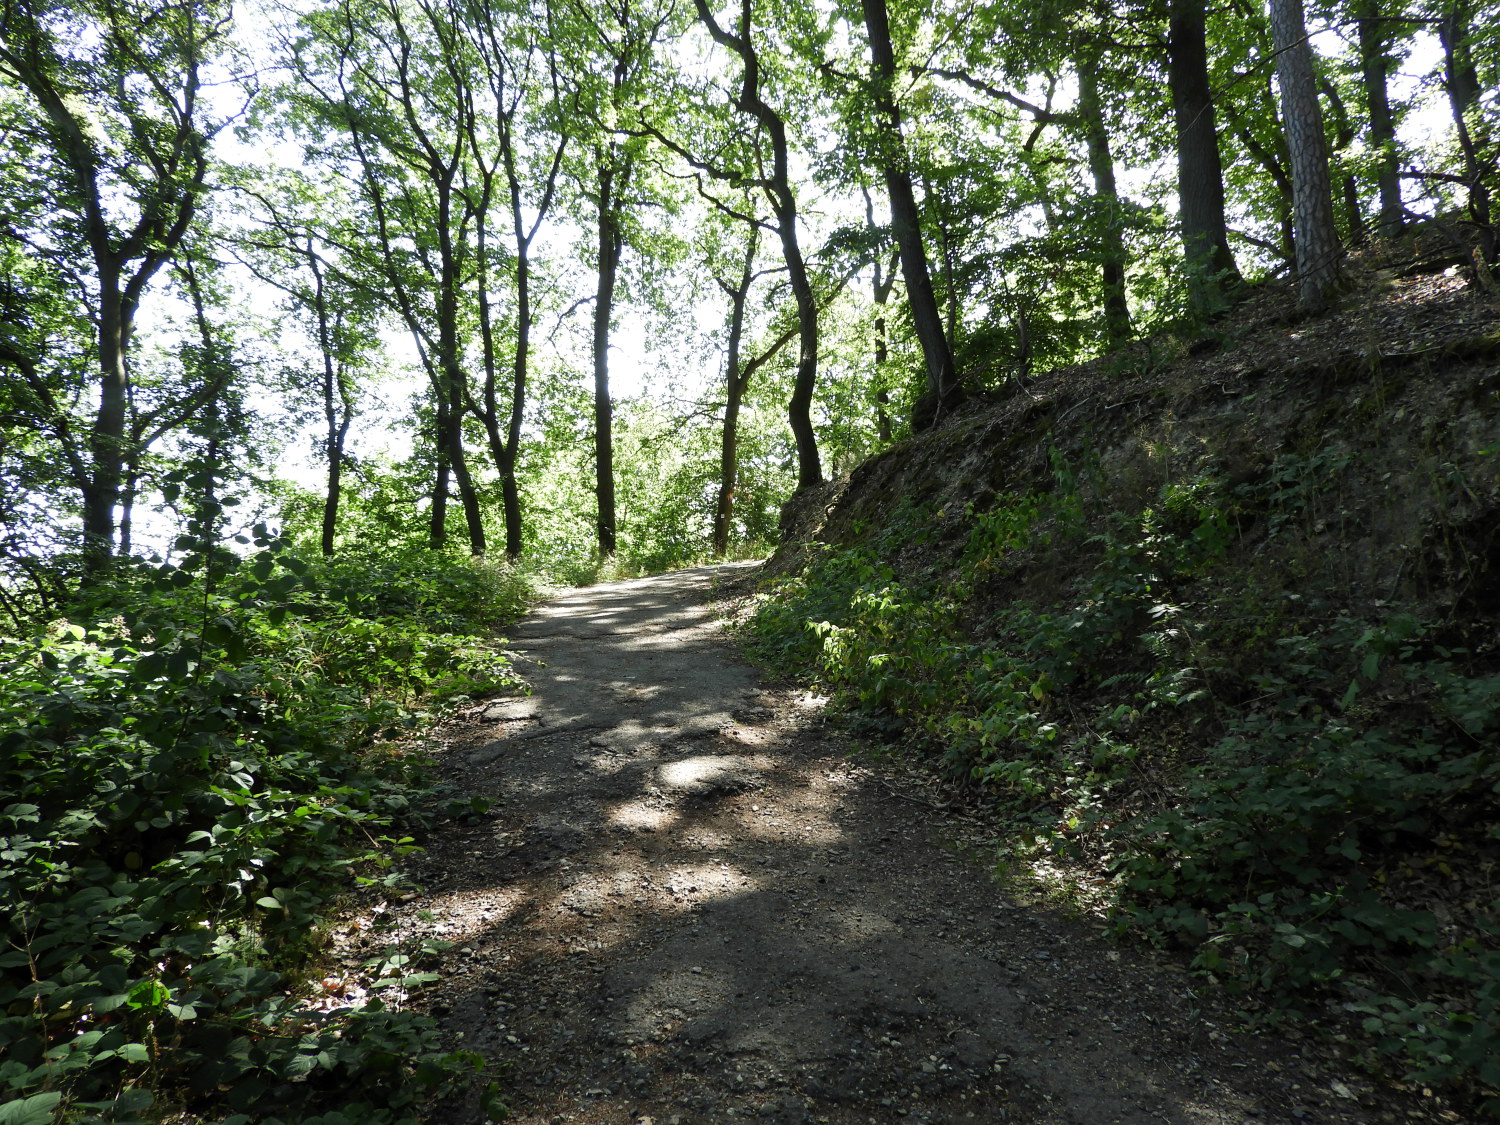 The trail at Hasenberg